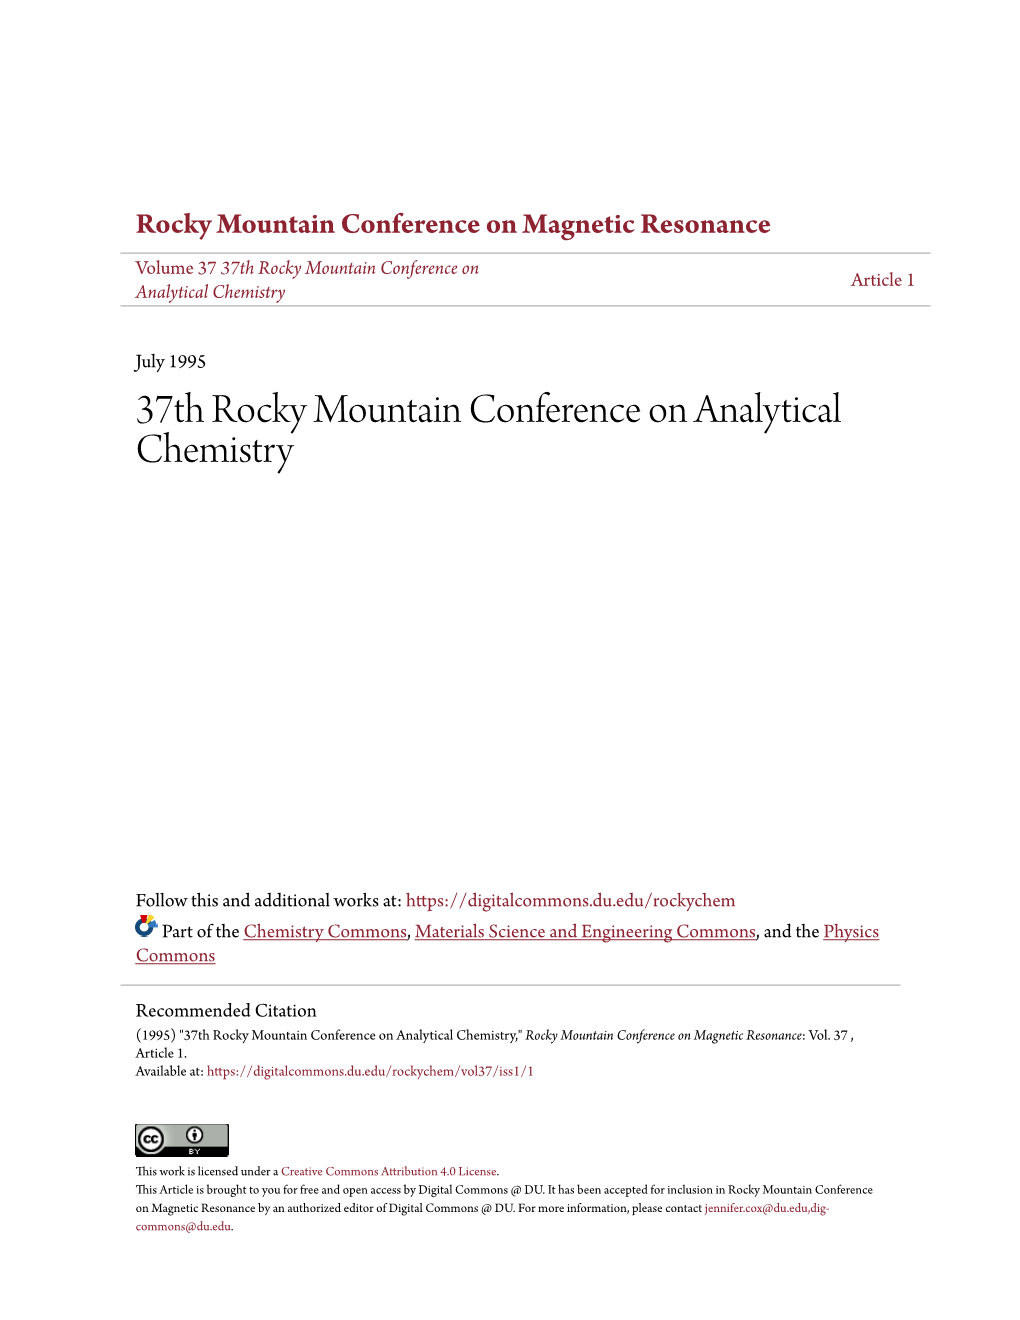 37Th Rocky Mountain Conference on Analytical Chemistry